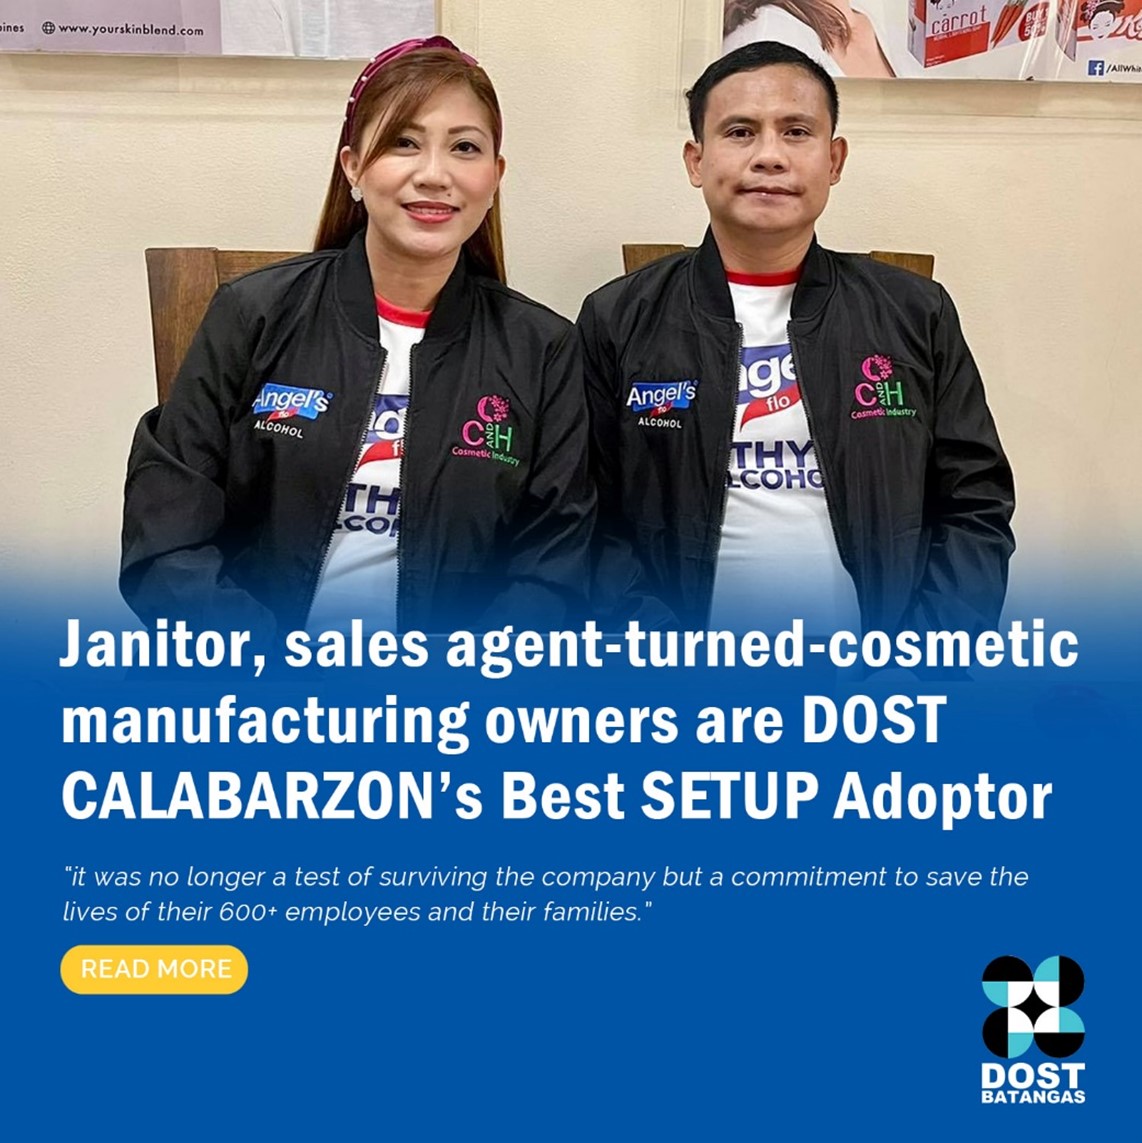 Janitor turned cosmetic manufacturer awarded the Best SETUP Adoptor for CALABARZON region image